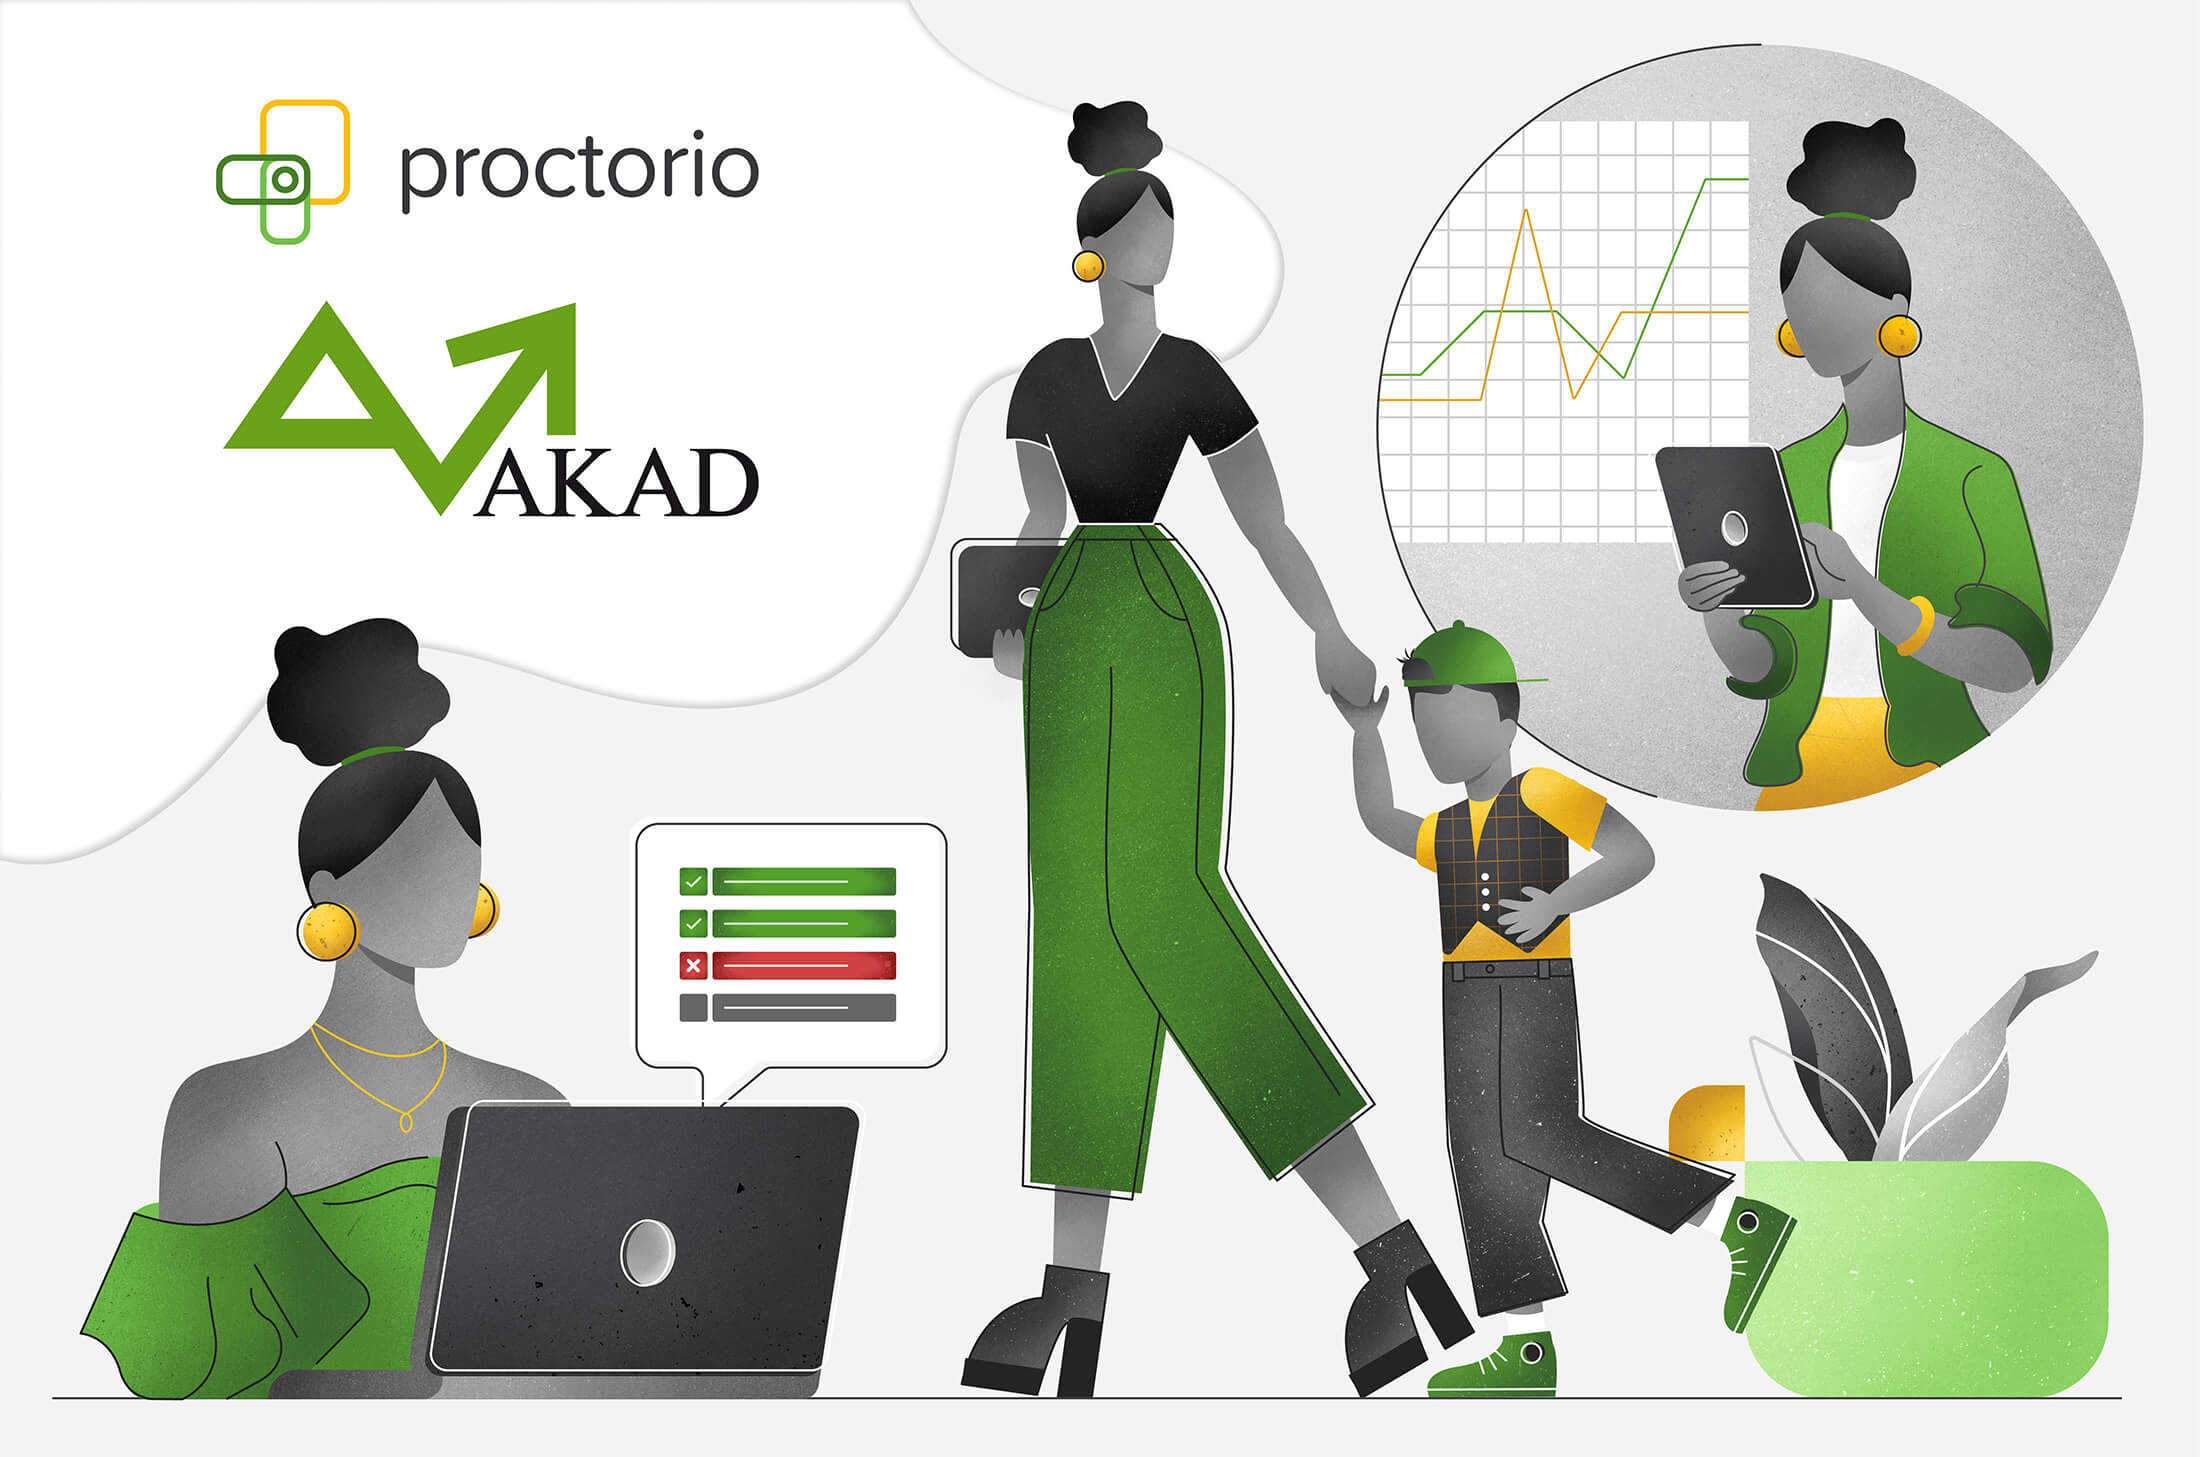 A woman with tied-up black hair, gold earrings, and fashionable green outfits is shown in three different contexts—on her laptop going over a checklist, with the laptop under one arm while holding a young child's hand as they walk, and next to a graph, navigating with her tablet. The Proctorio and AKAD logos are on the upper left.